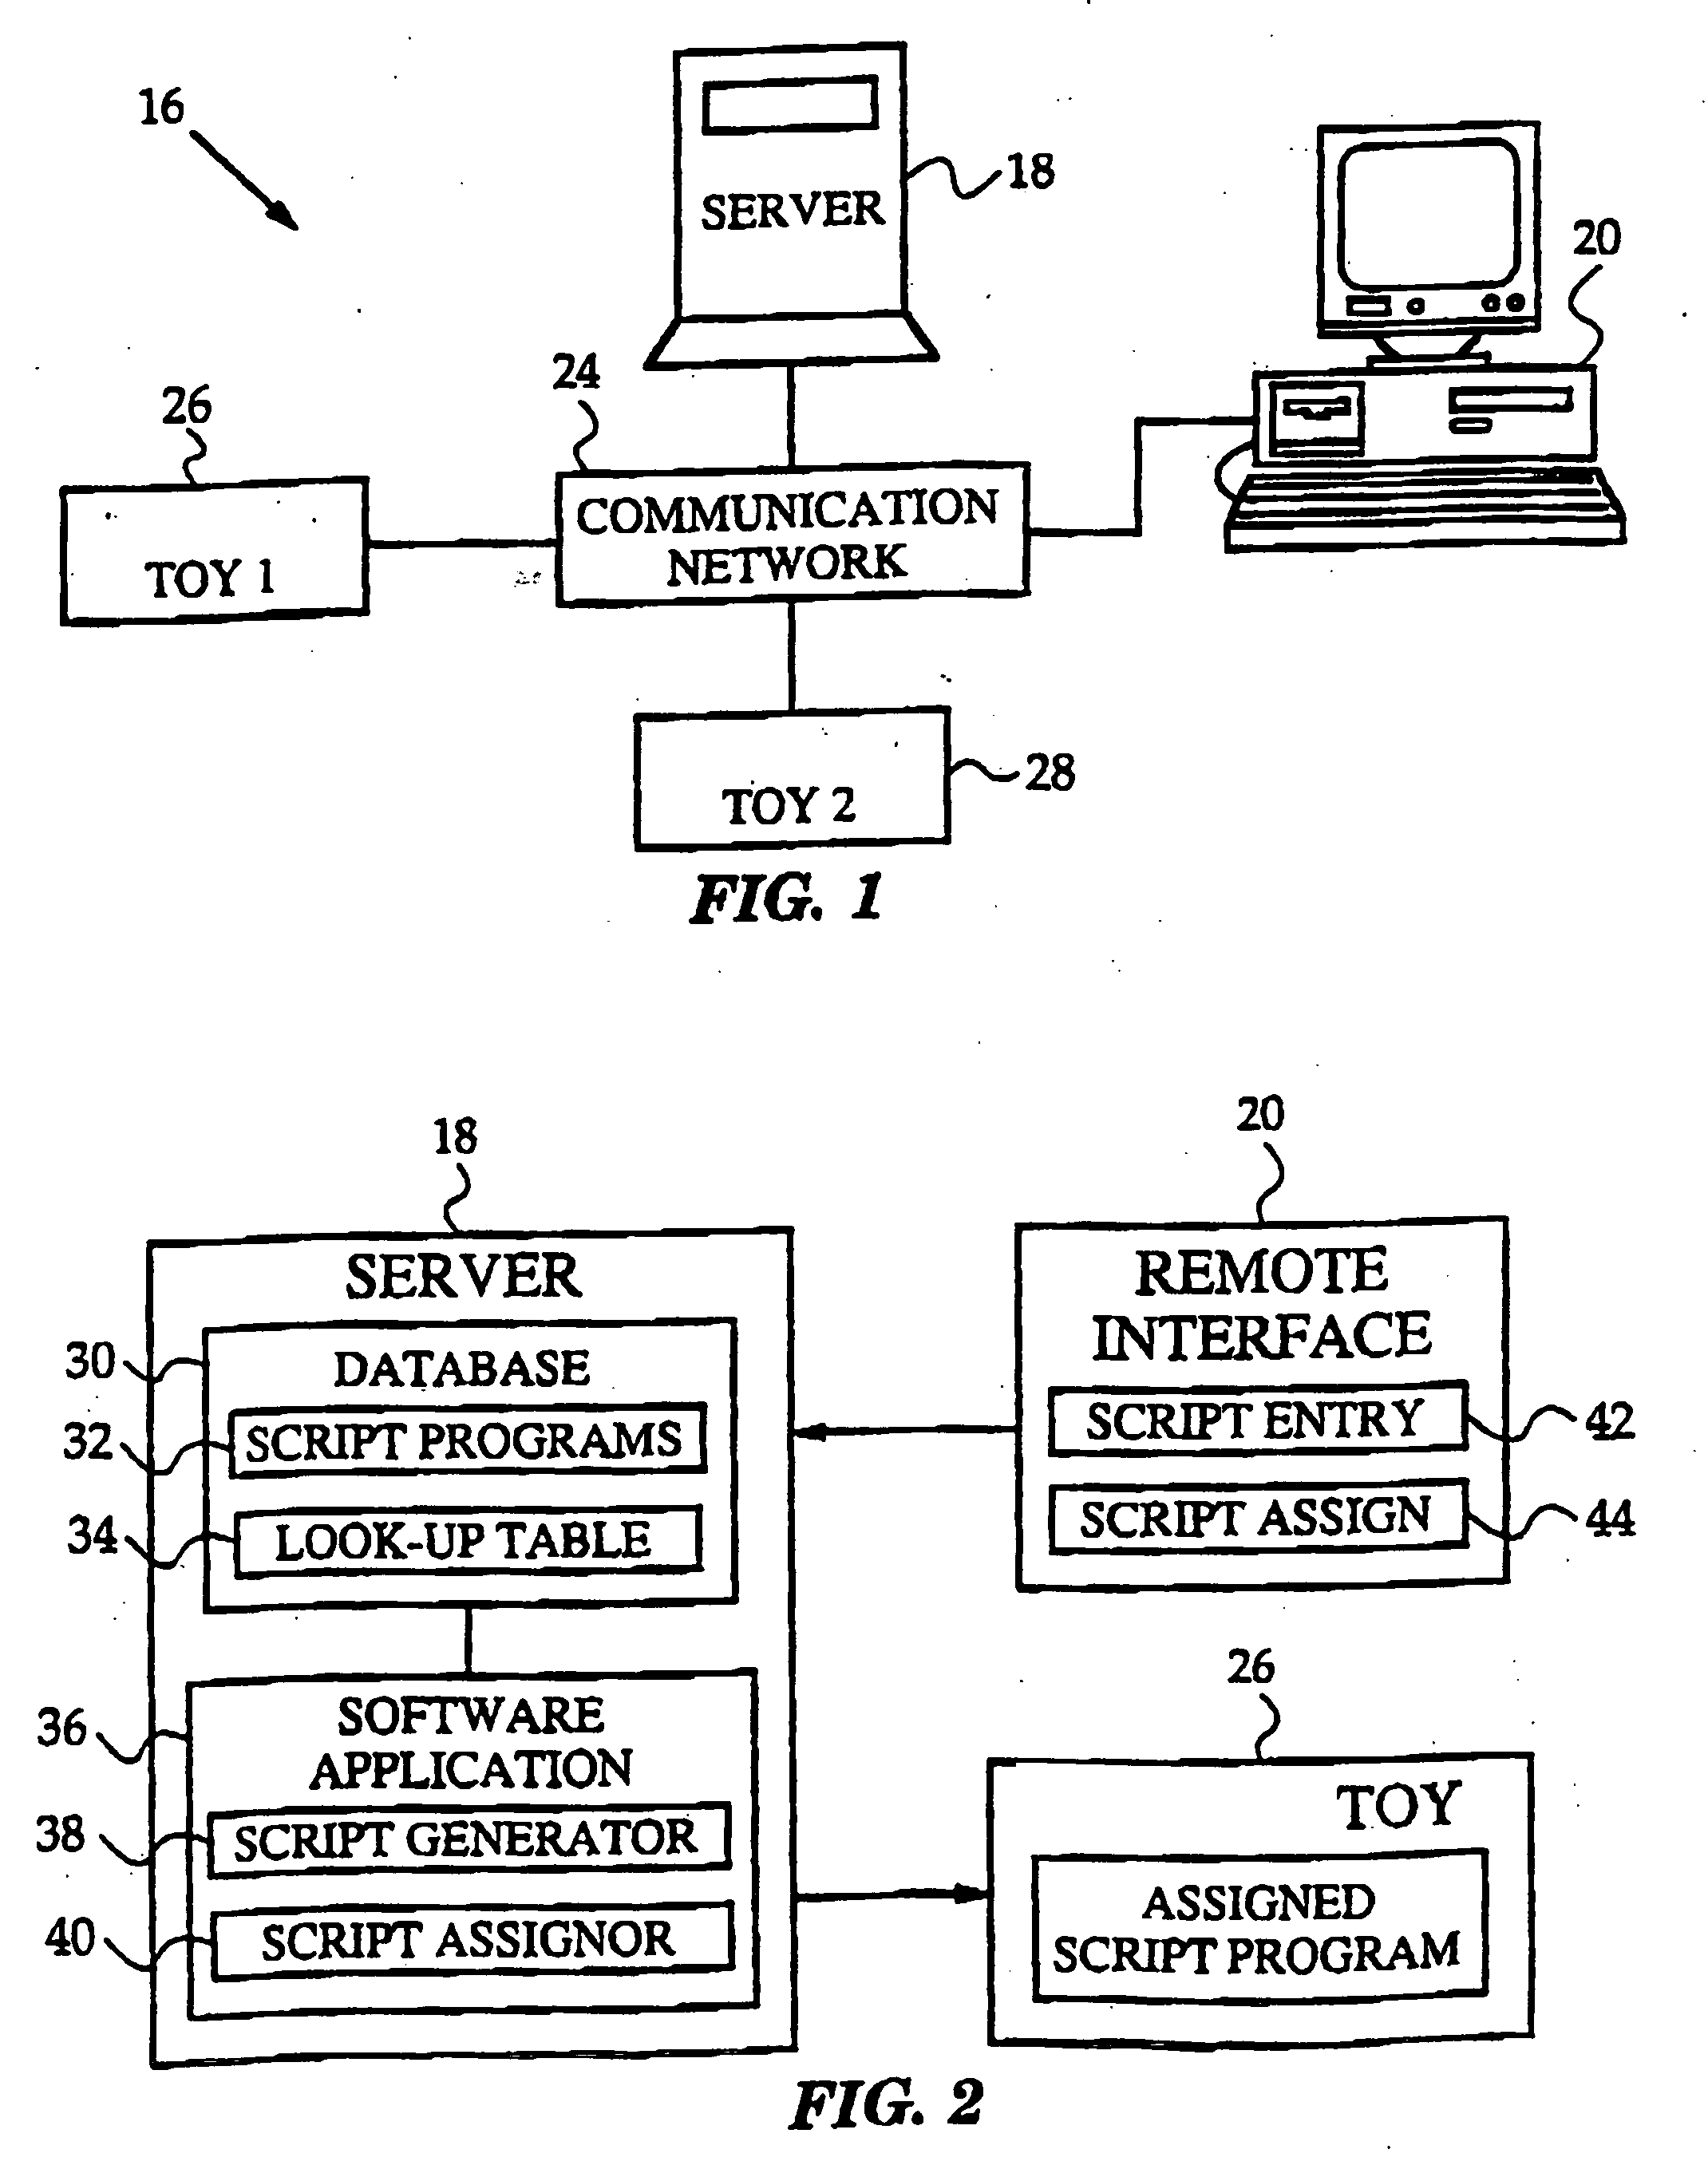 Remote generation and distribution of command programs for programmable devices